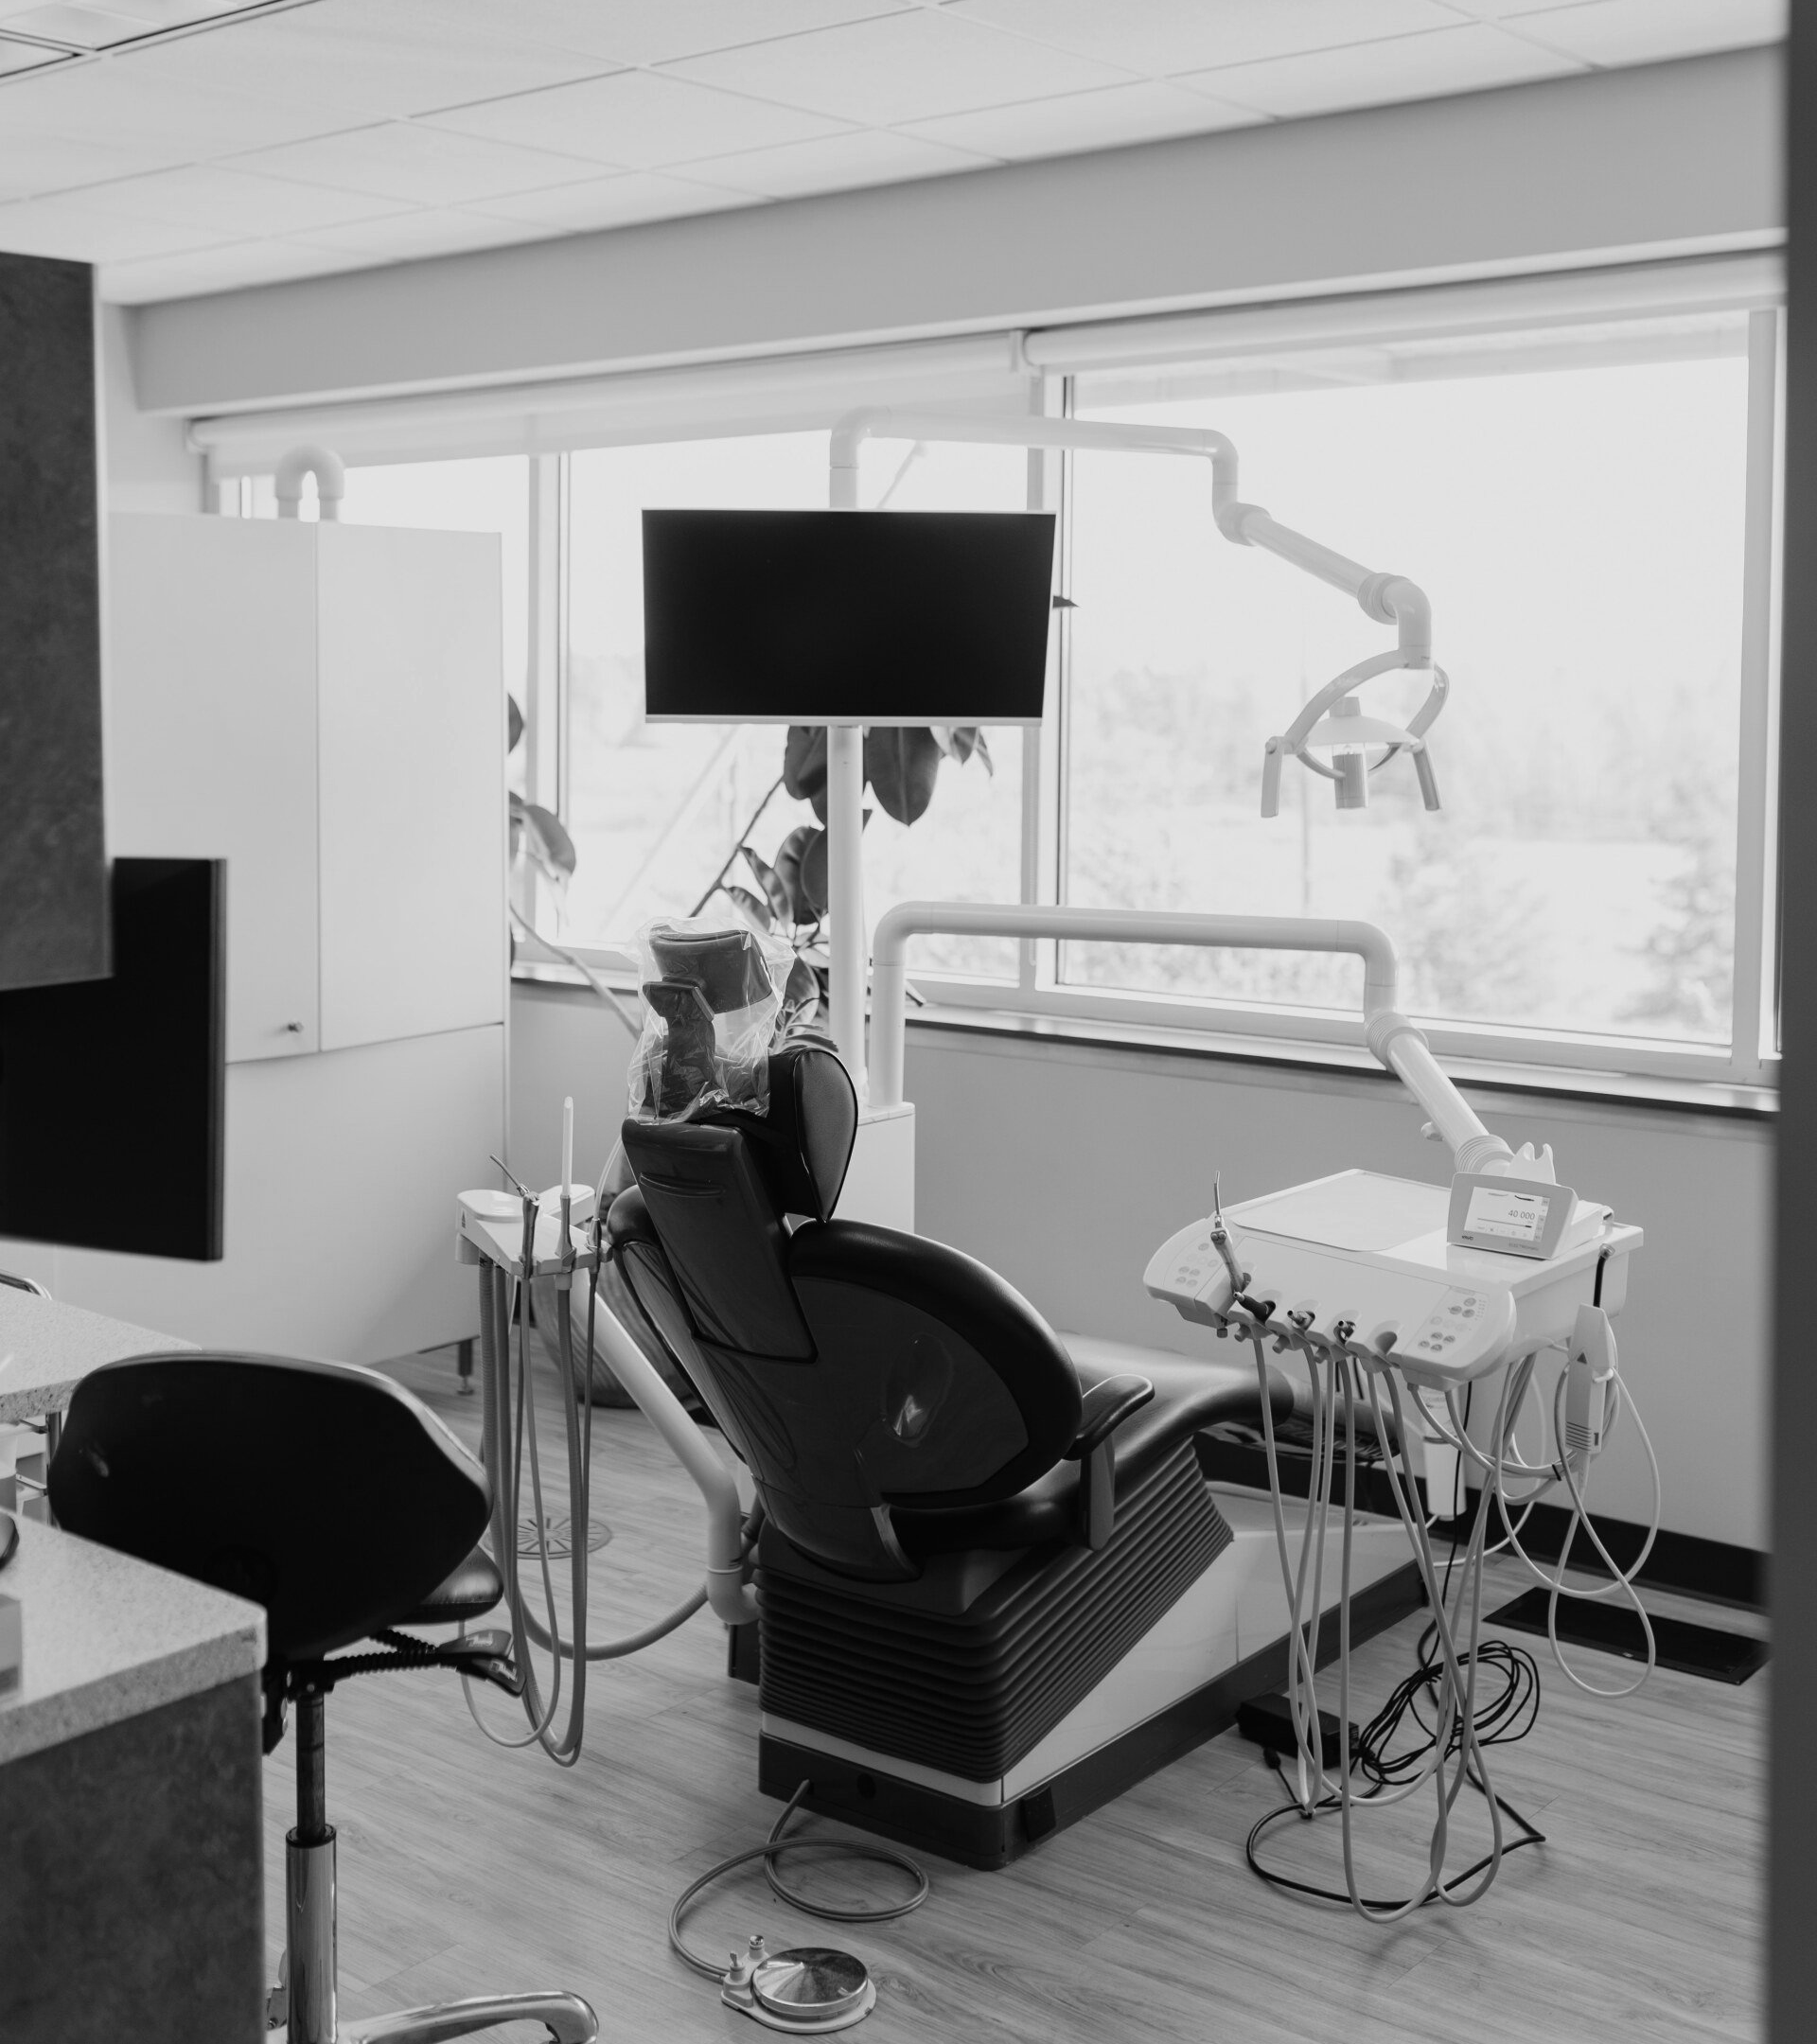  Dental Office Pics | Periodontist, Botox, clear aligners, nutrition counseling | Leawood KS 66209